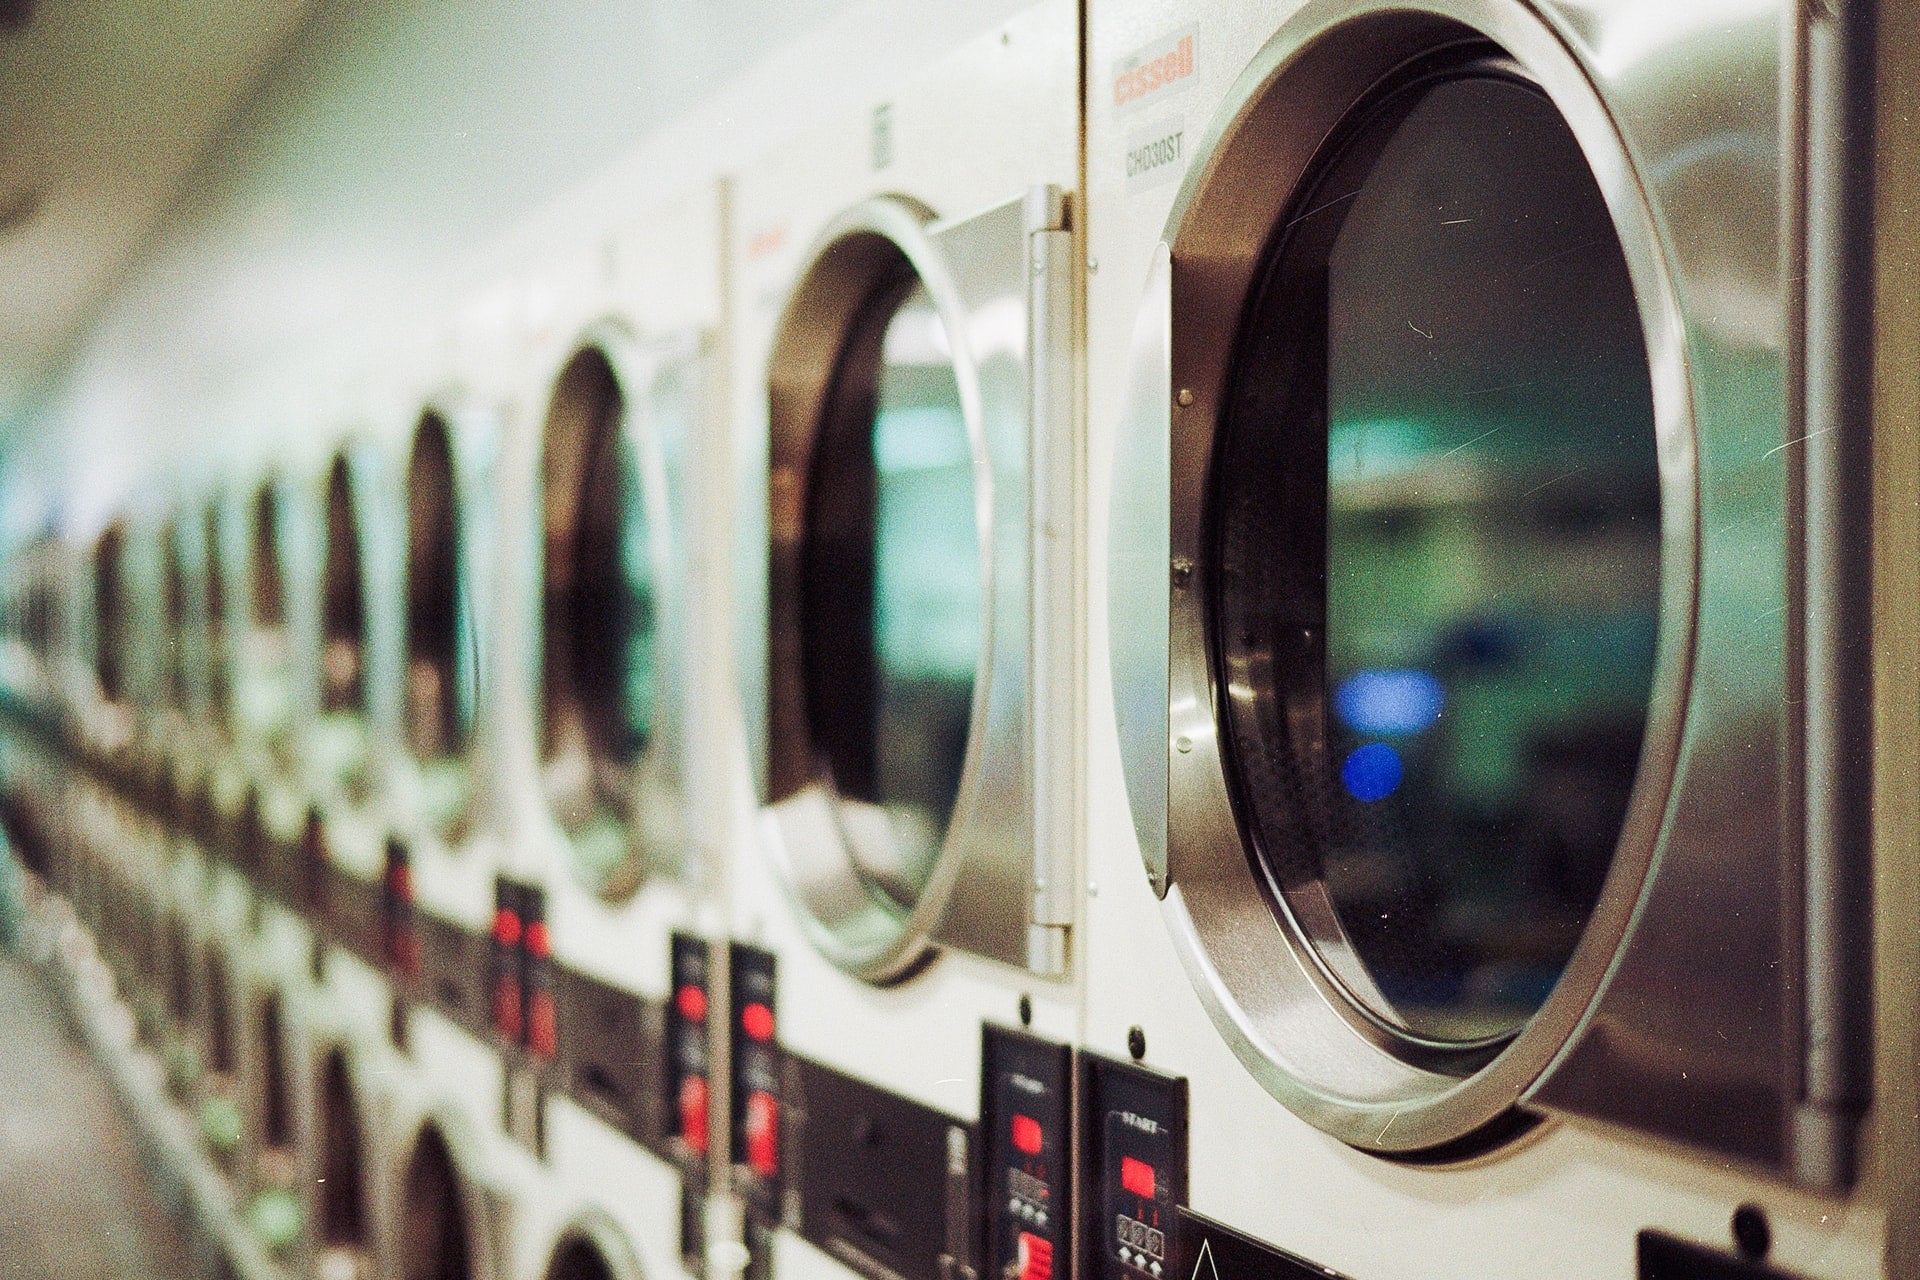 What rising energy prices could mean for the laundry industry